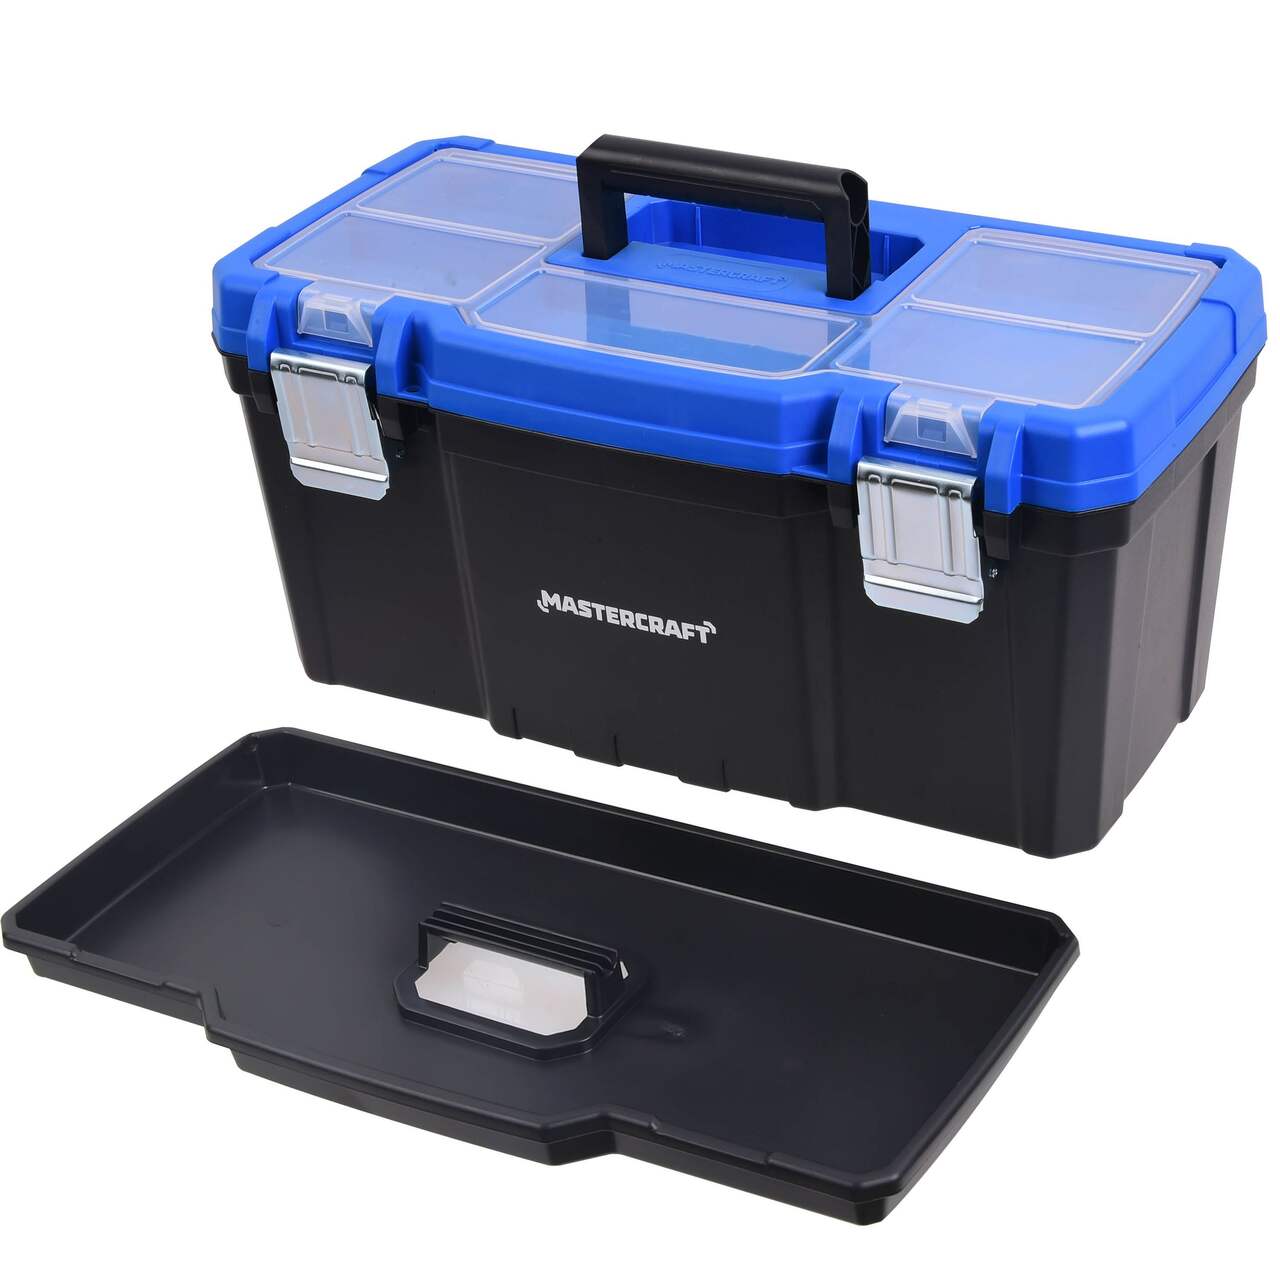 Mastercraft Portable Metal Hip Roof Tool Box w/ Removable Tray